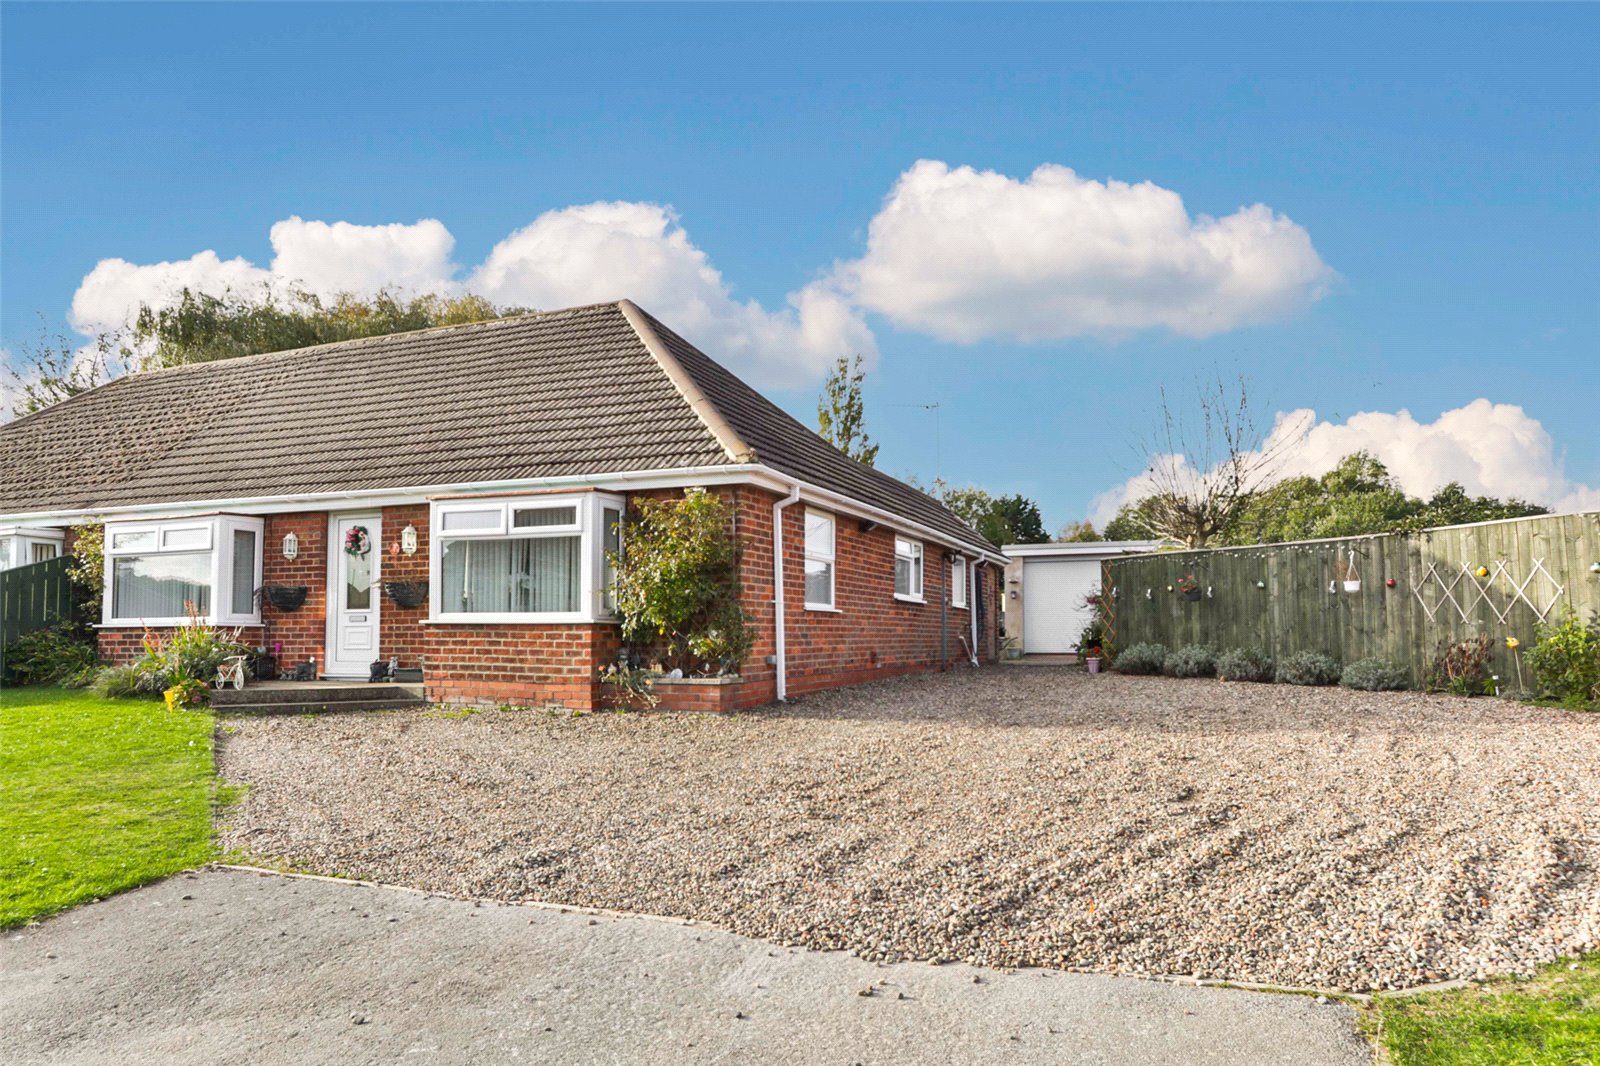 2 bed bungalow for sale in East End Road, Preston 0